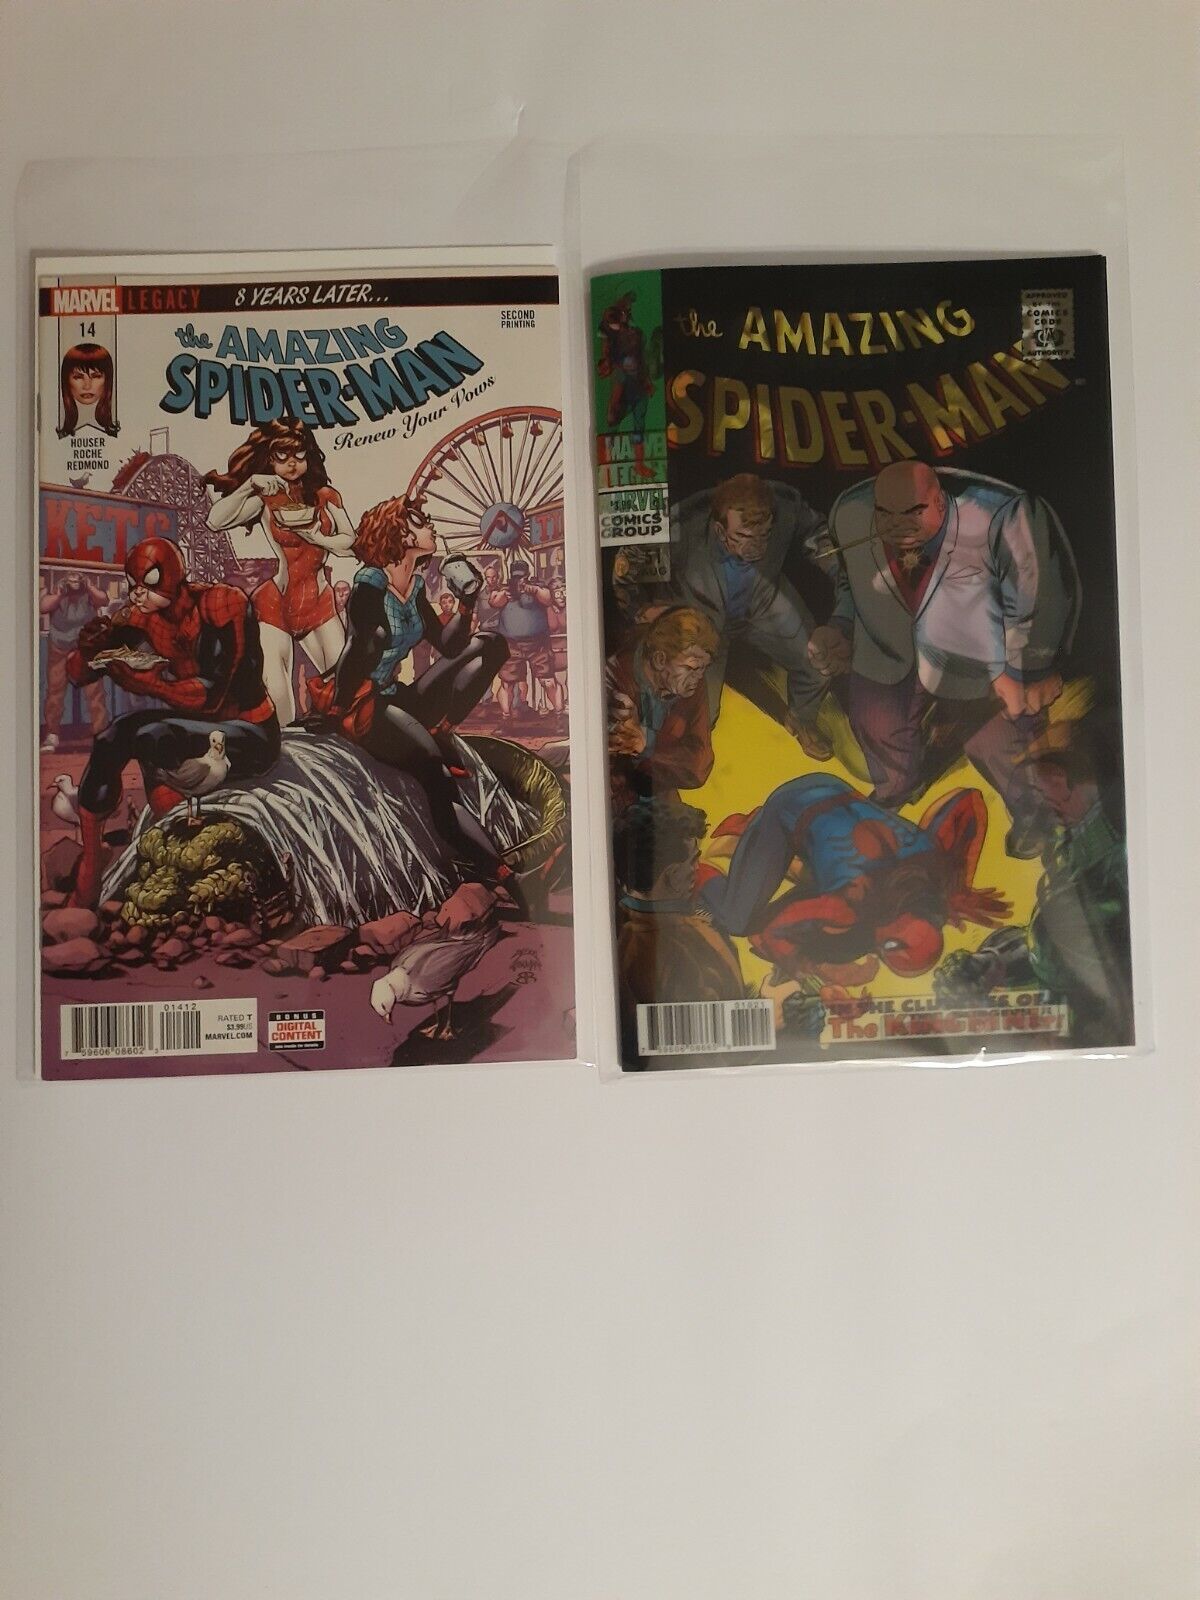 2-The Amazing Spiderman Comic Books Variant 3D #10, #14 New Marvel Legacy